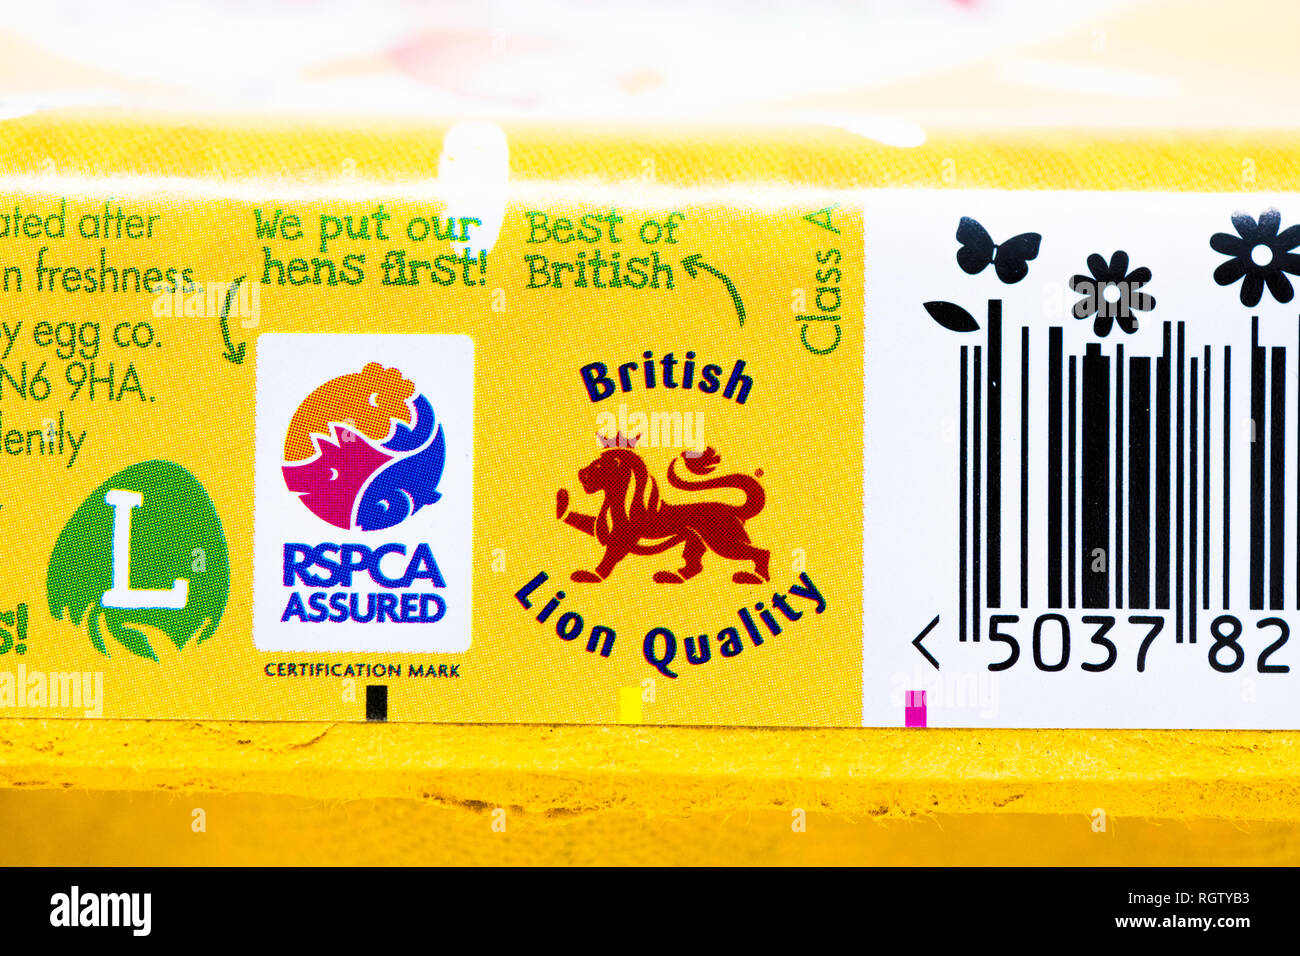 The Happy Egg co. egg carton stamped with the British Lion quality and the RSPCA assured logo. Stock Photo